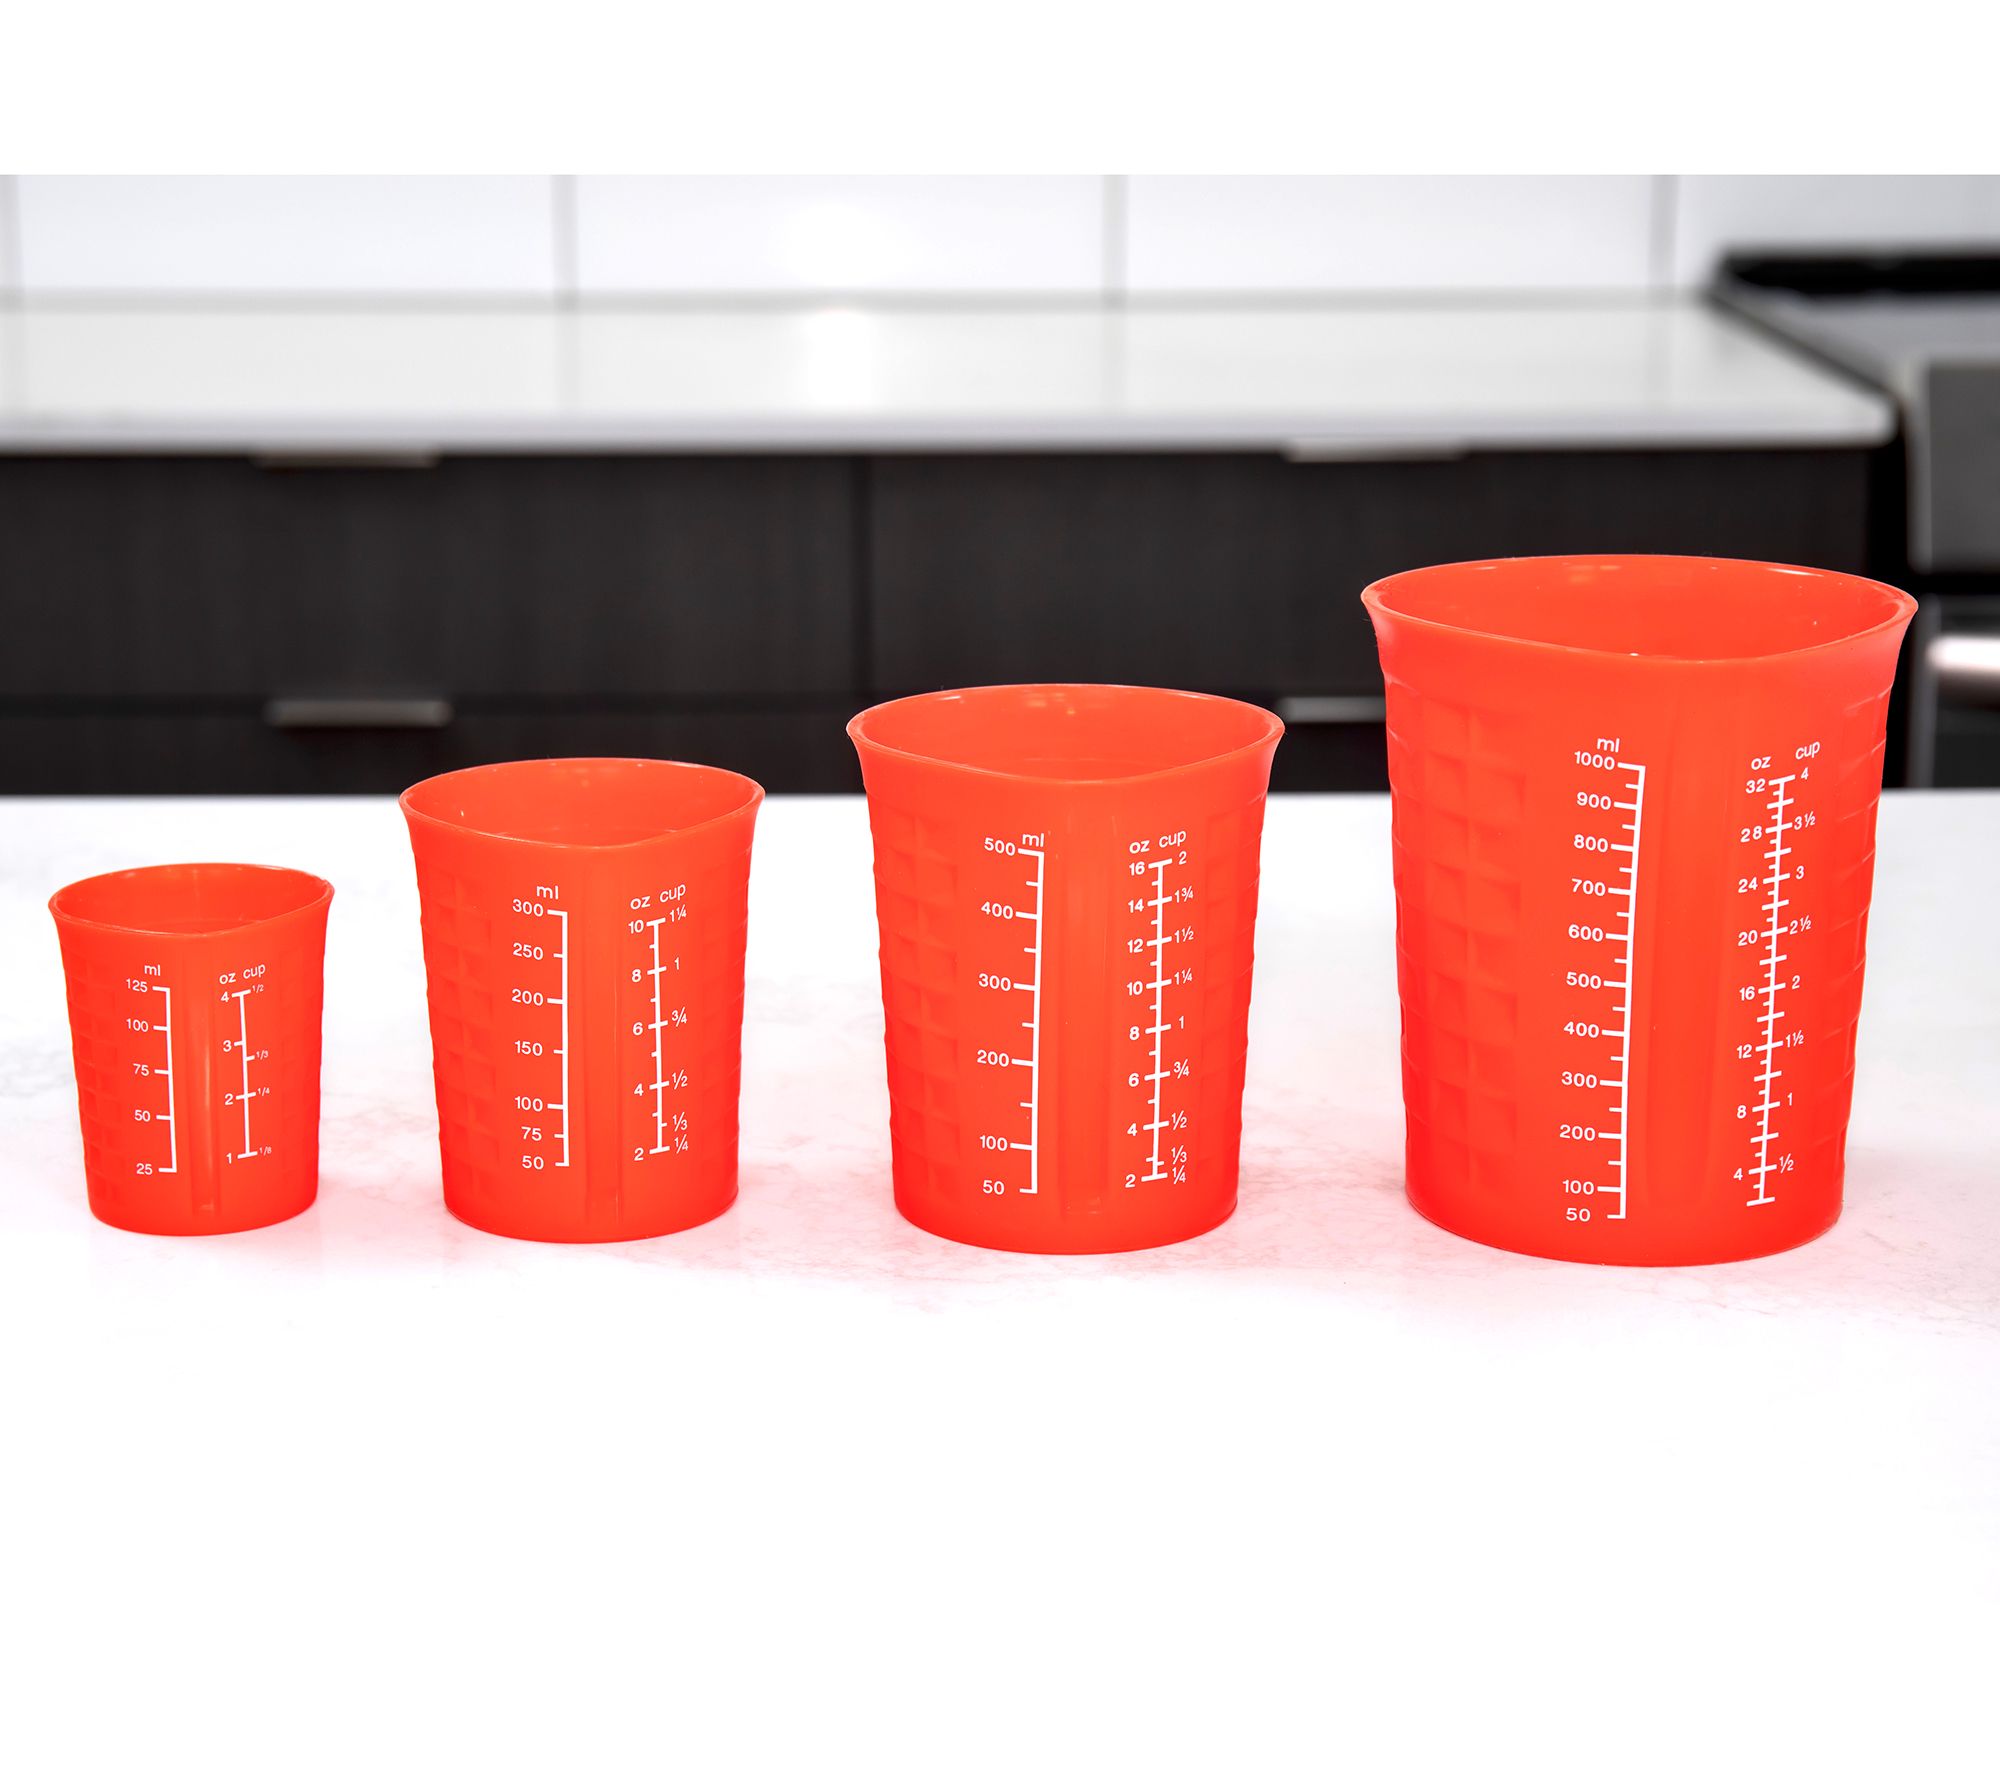 The Test Kitchen Swears By These Silicone Measuring Cups